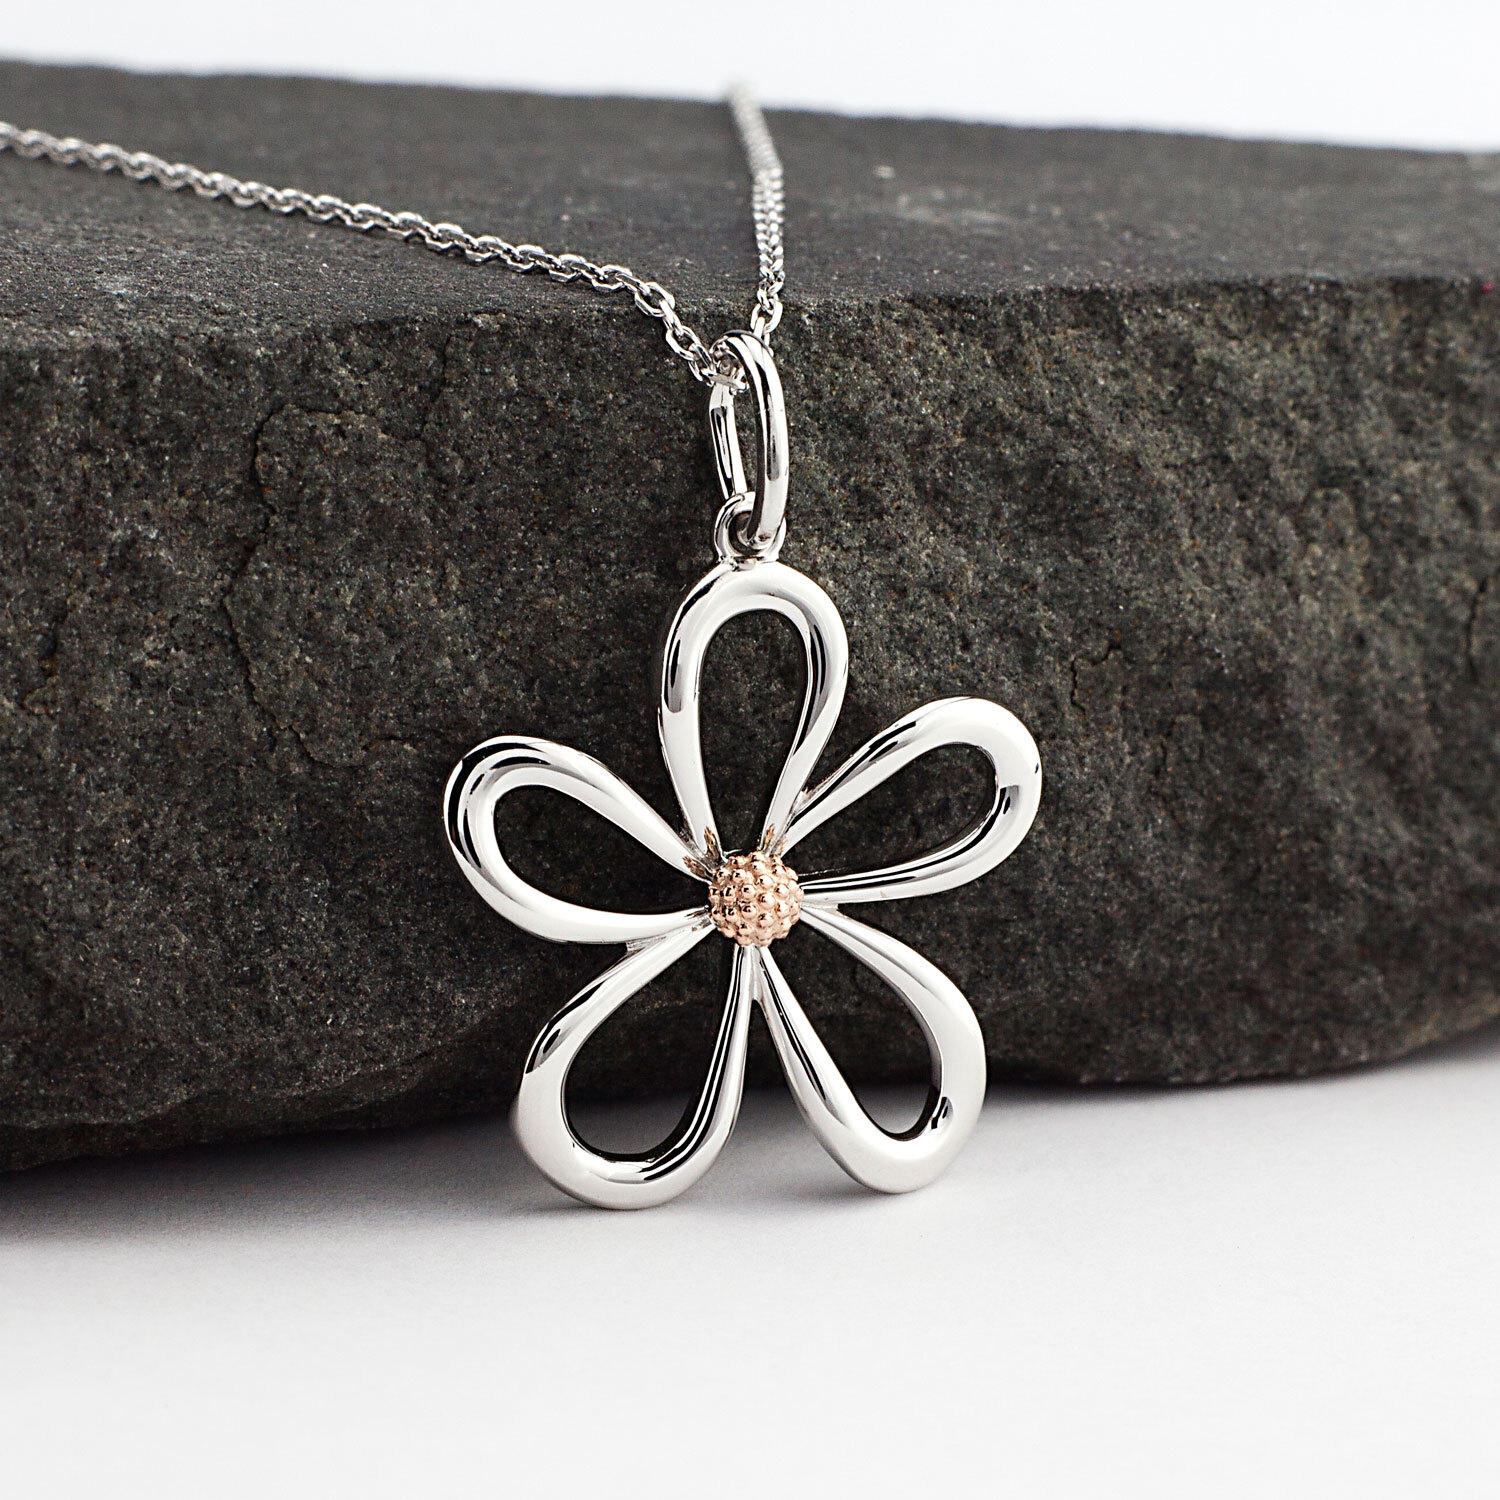 Bronze and Silver Daisy Necklace with Gold Fill Chain